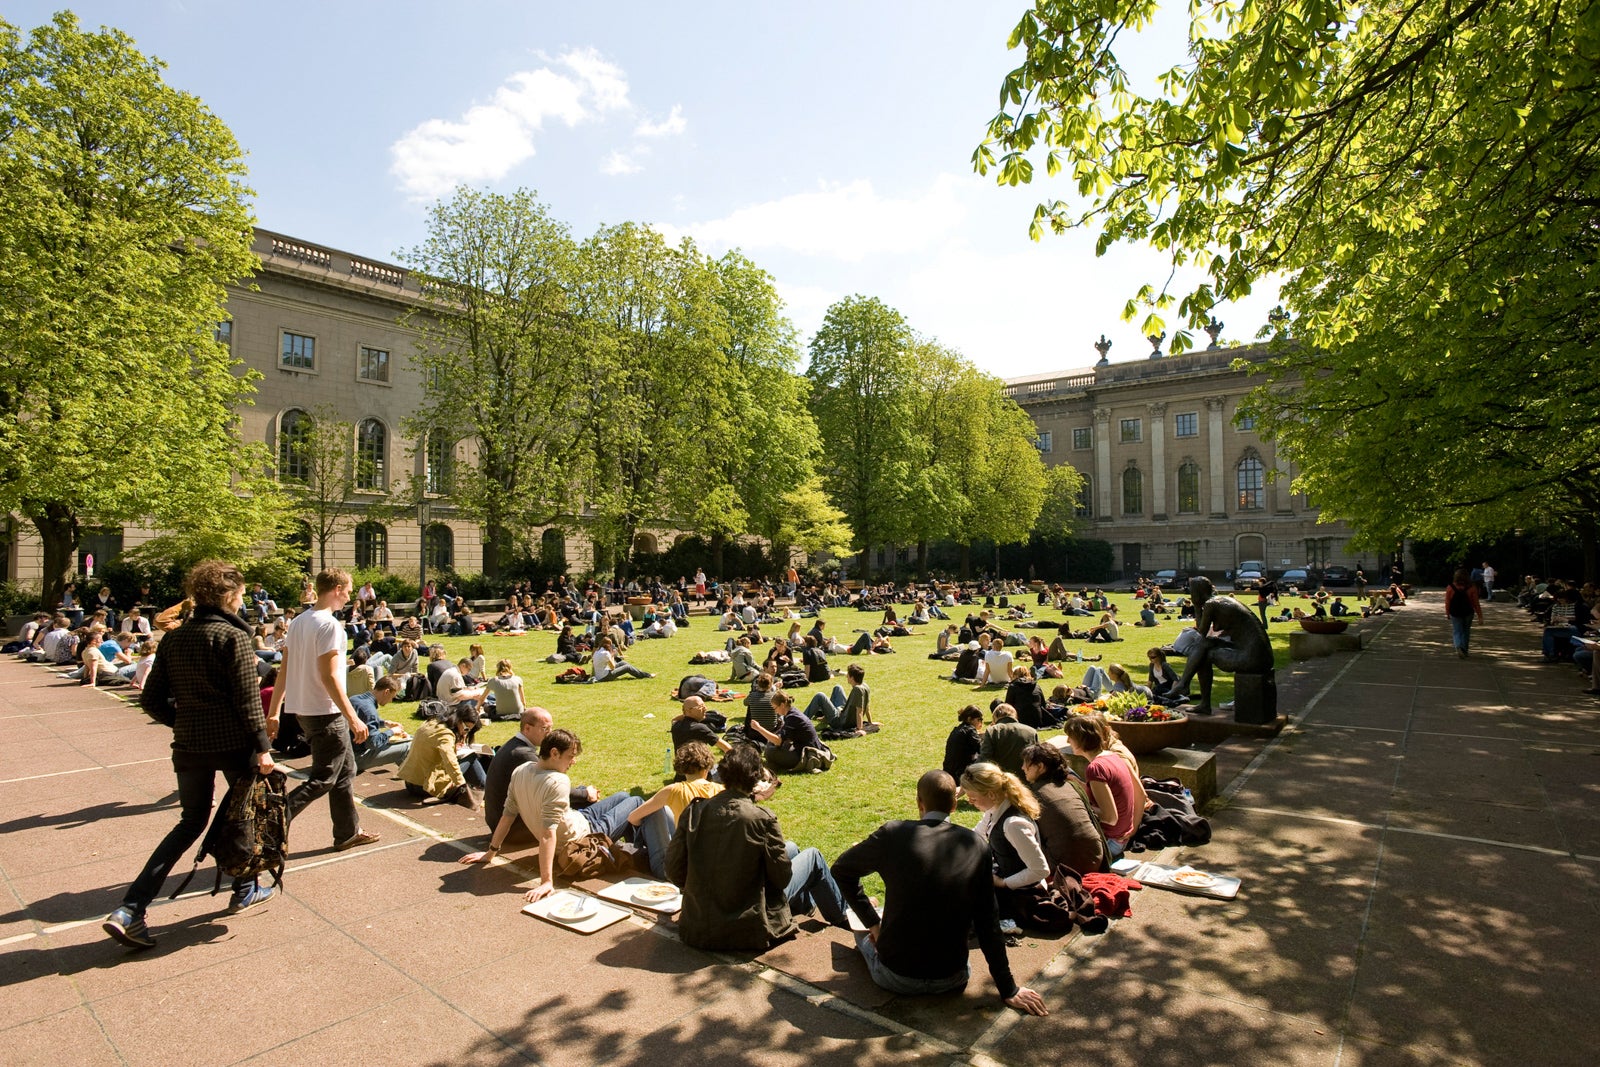 Students on campus of Humboldt University, Berlin, Germany, Europe